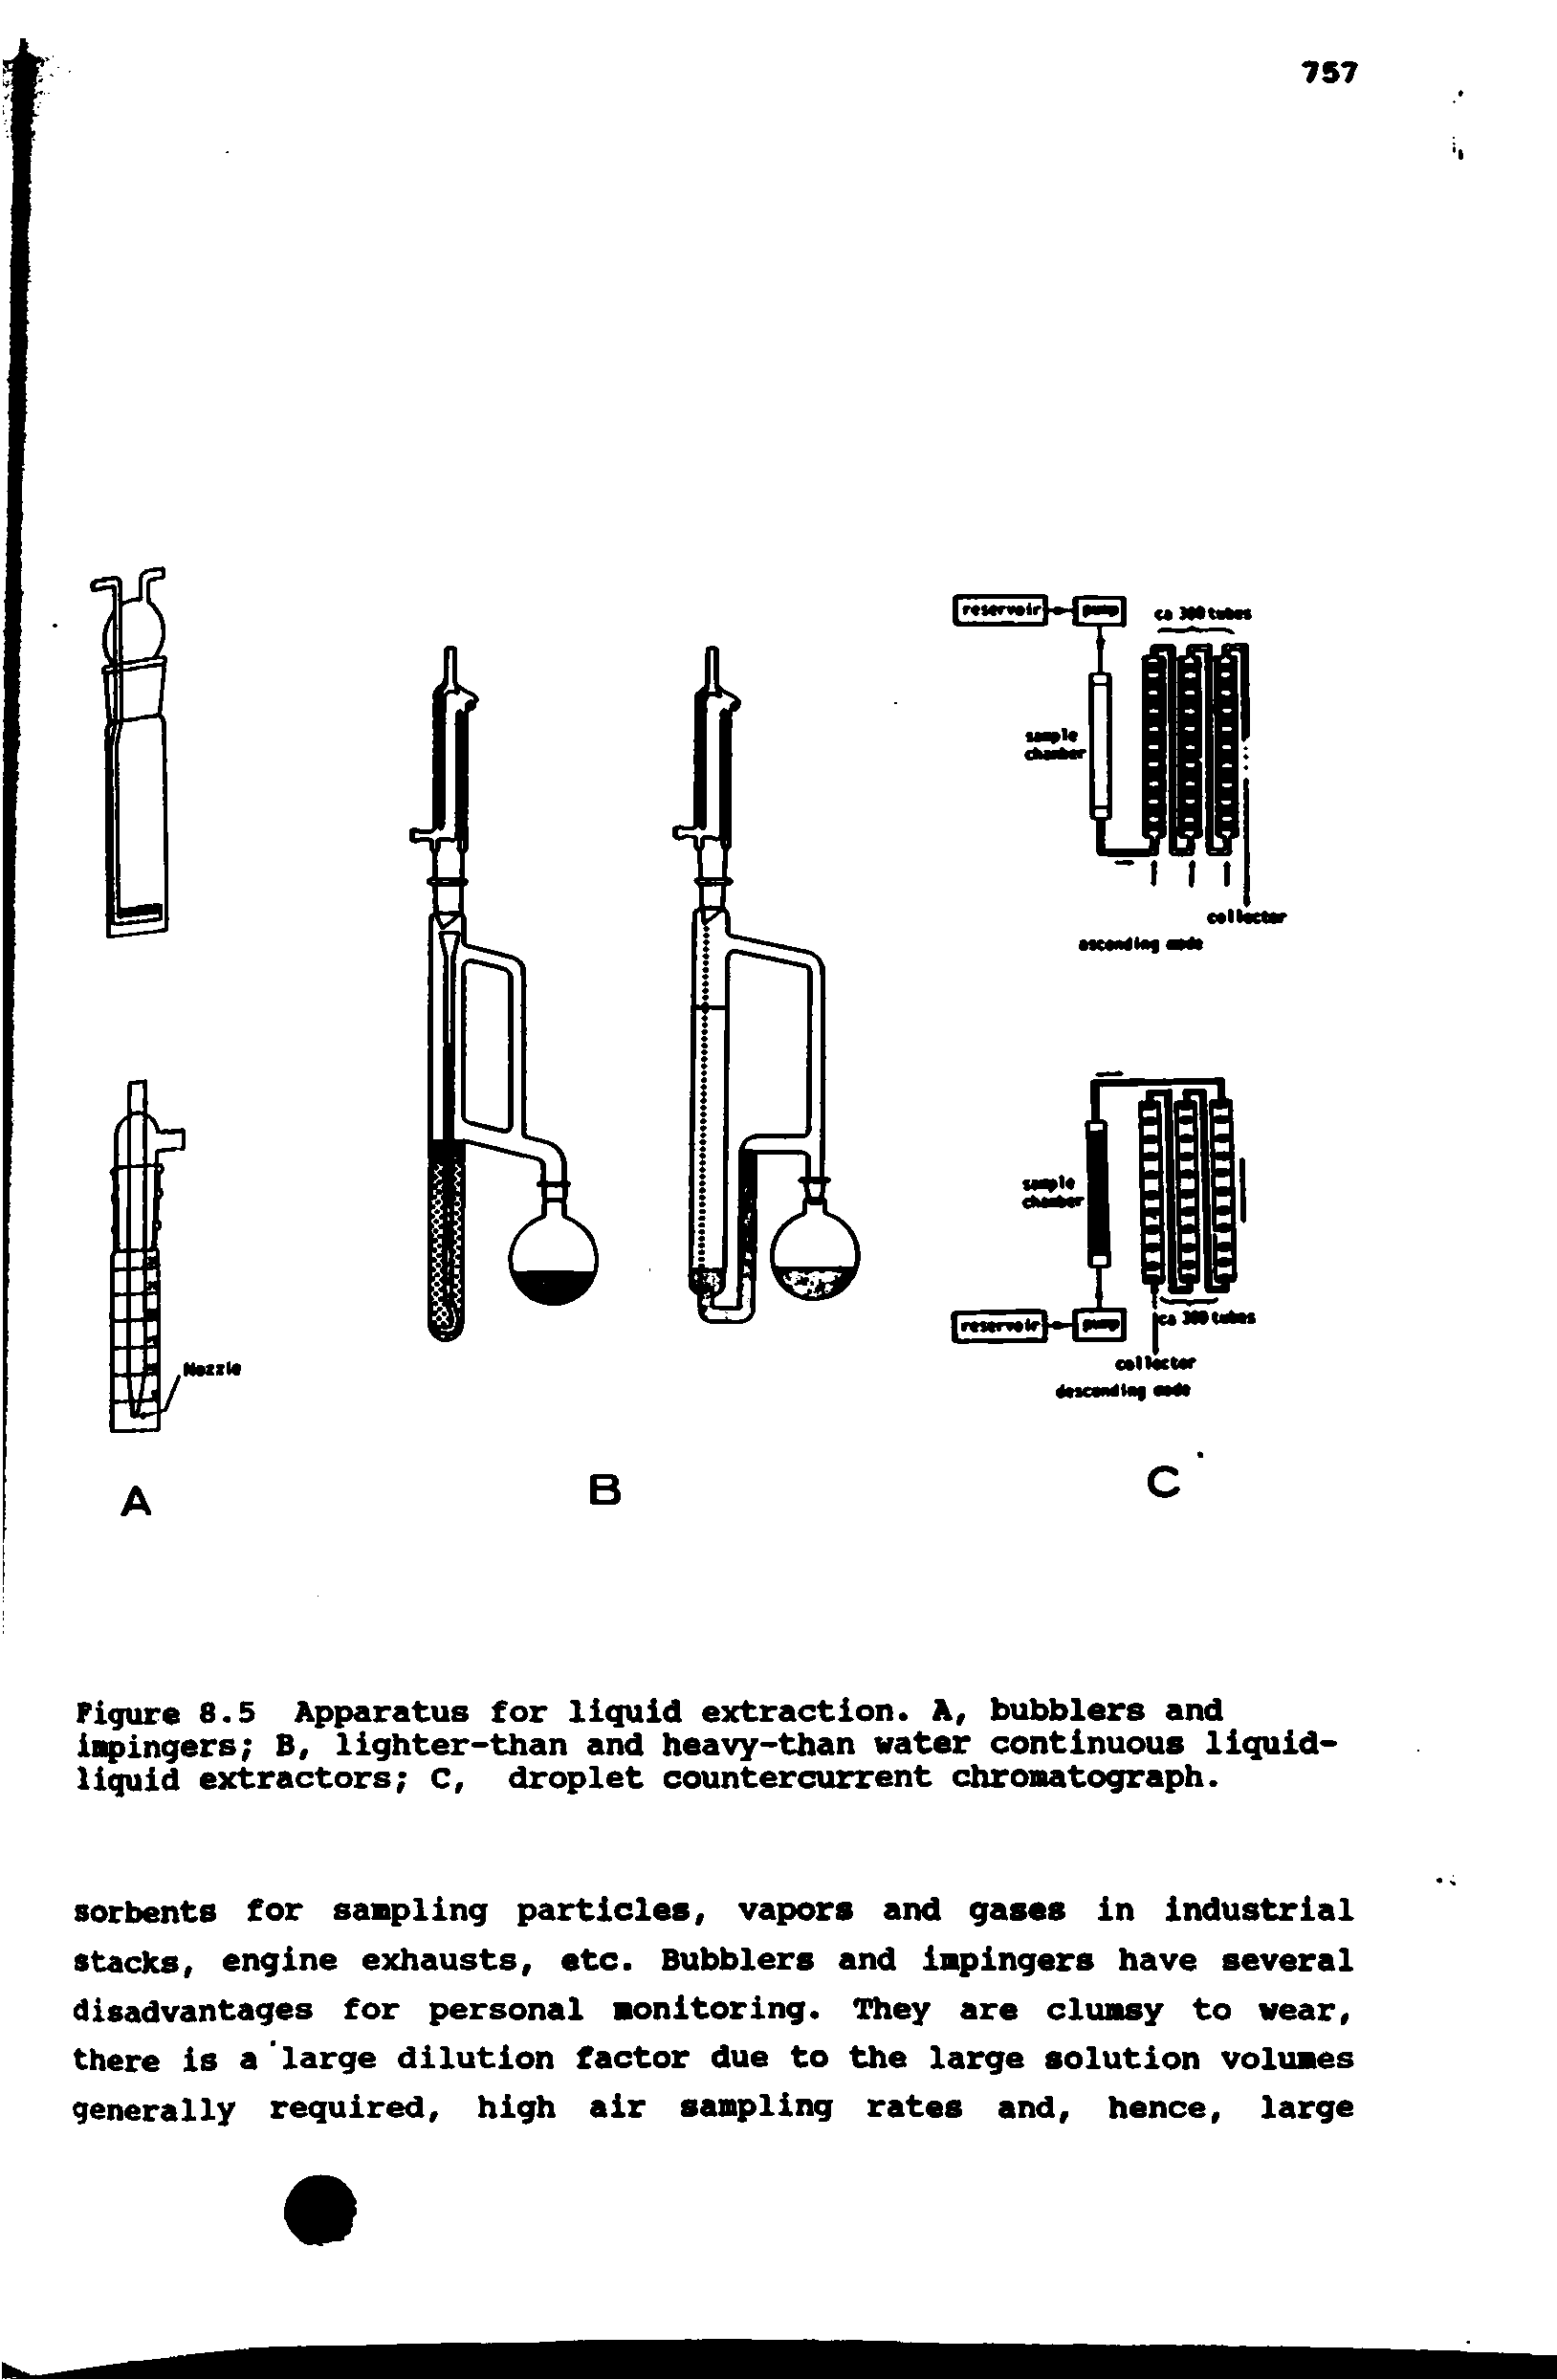 Figure 8.5 Apparatus for liquid extraction. A, bubblers and iepingers B, lighter-than and heavy-than water continuous liquid-liquid extractors c, droplet countercurrent chronatograph.